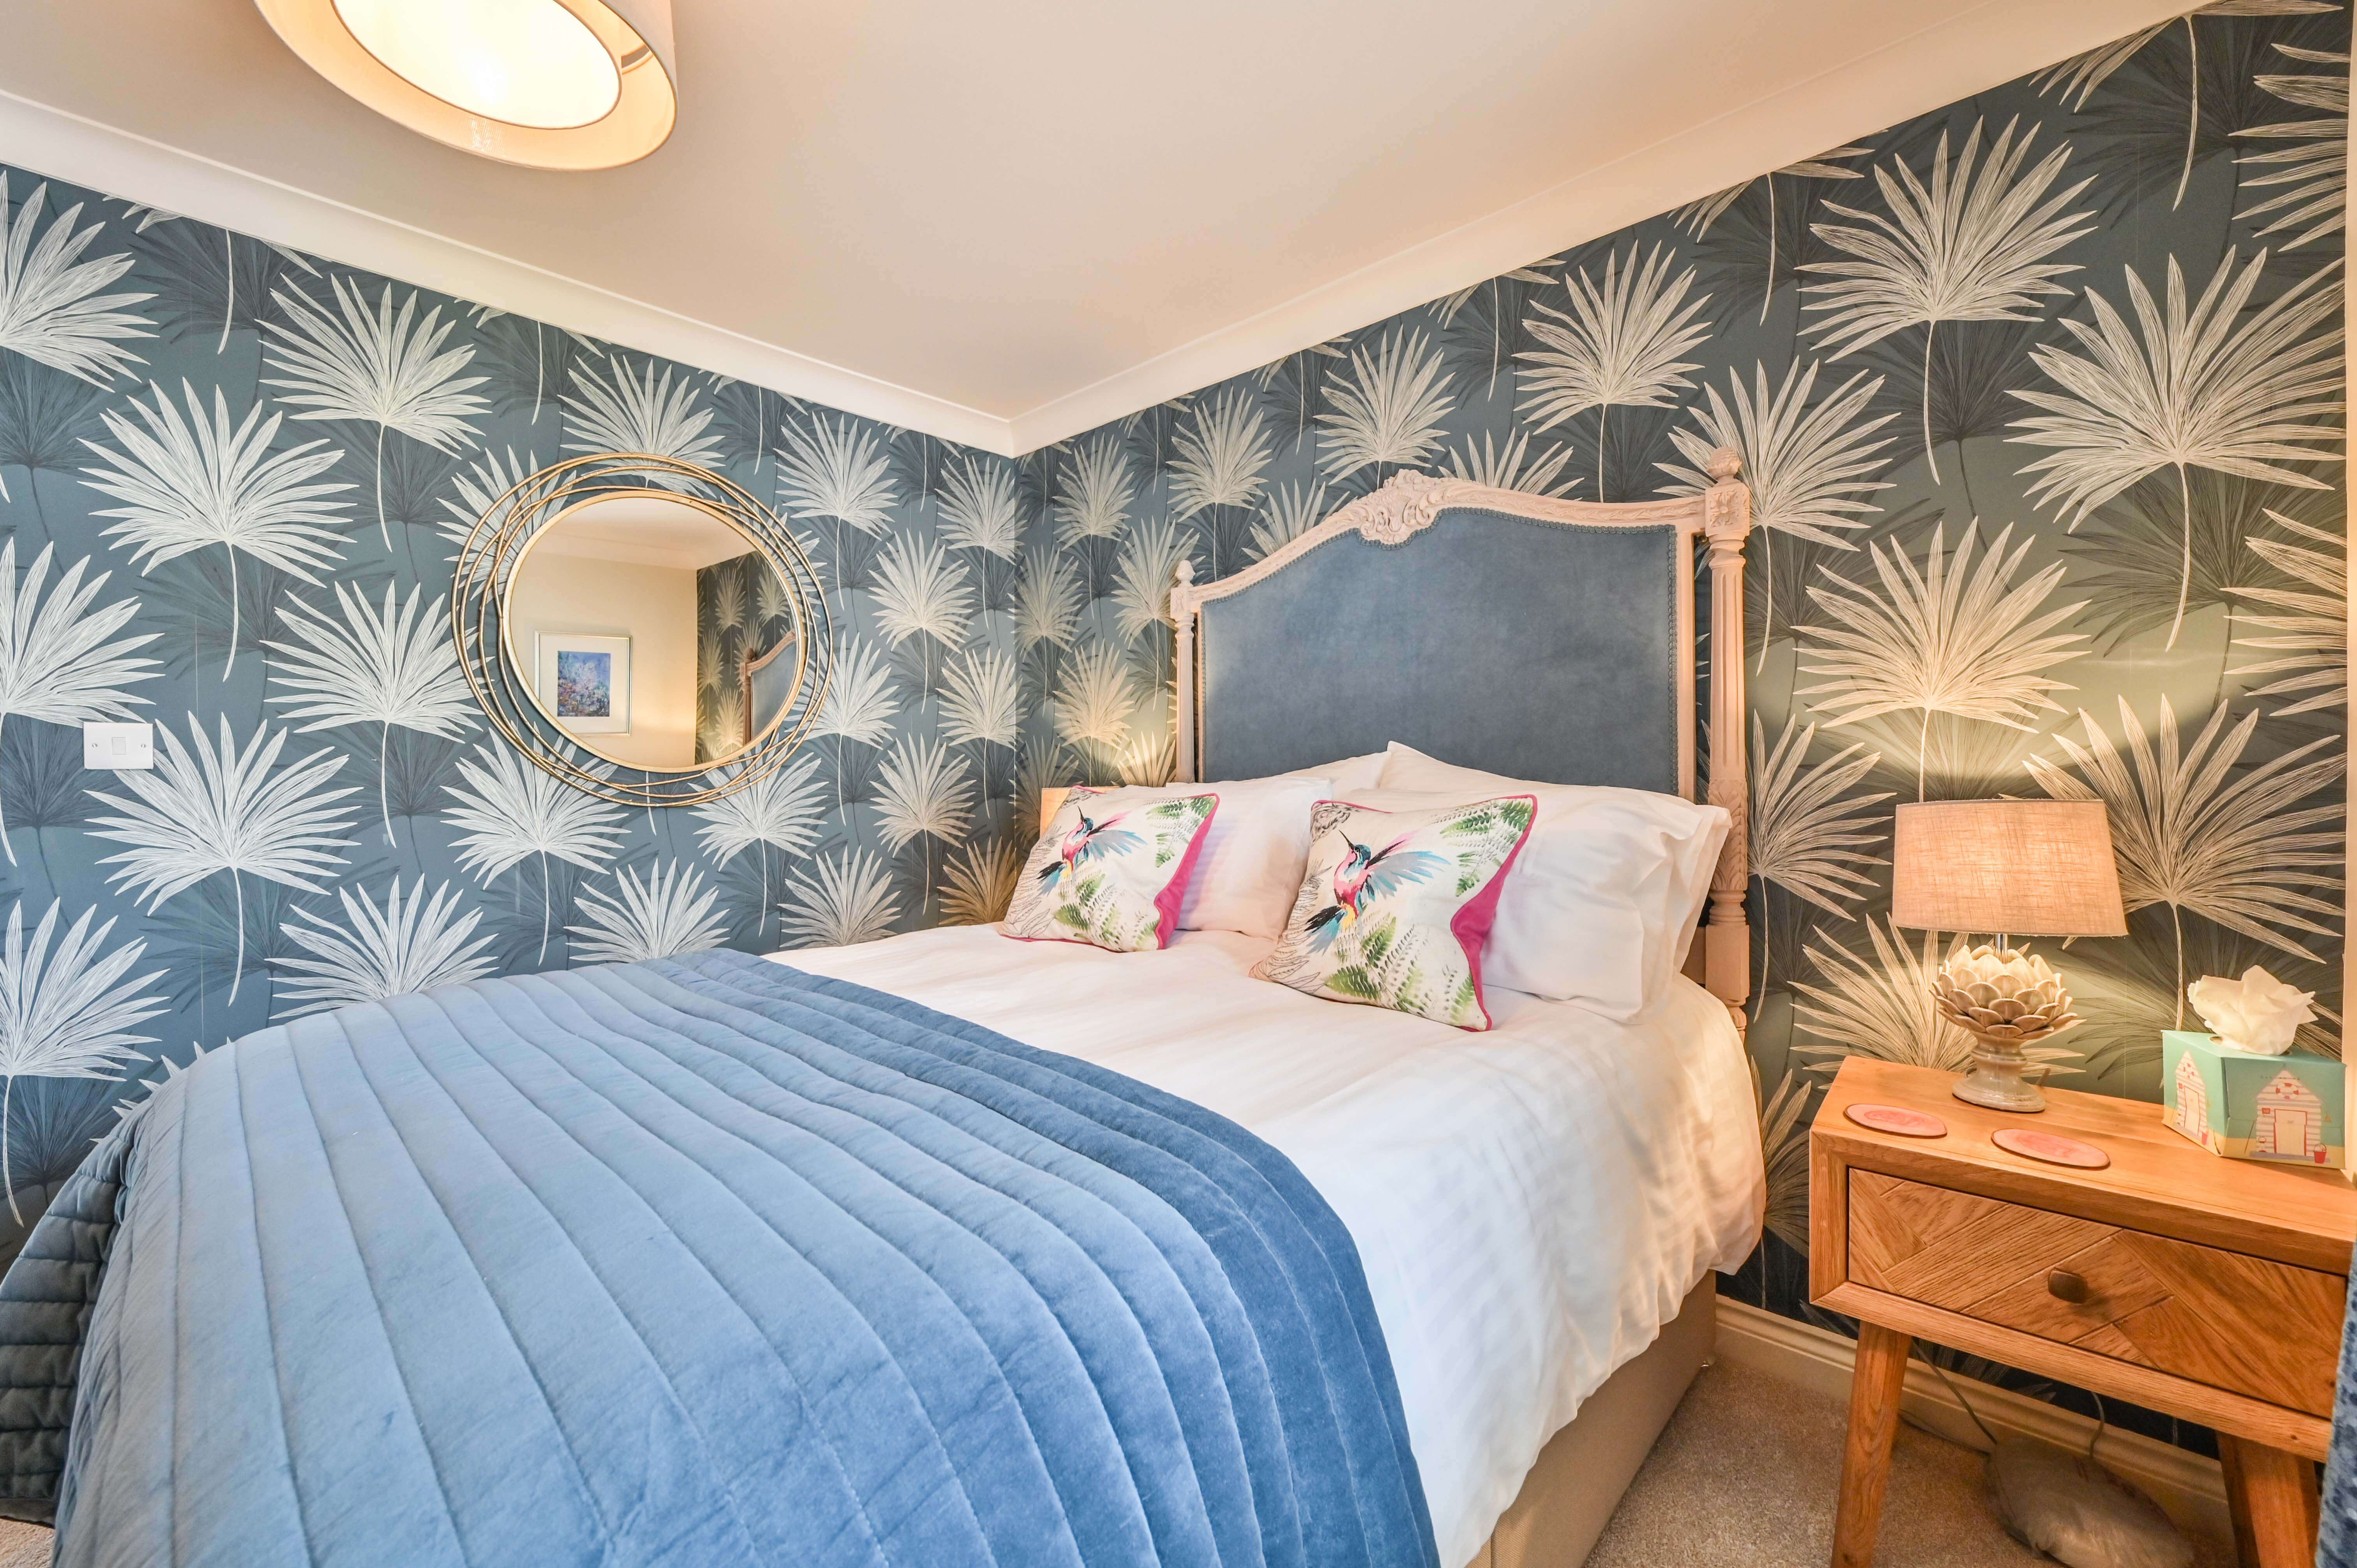 Lisburne Place Town House - Luxury accommodation in Torquay. Second bedroom